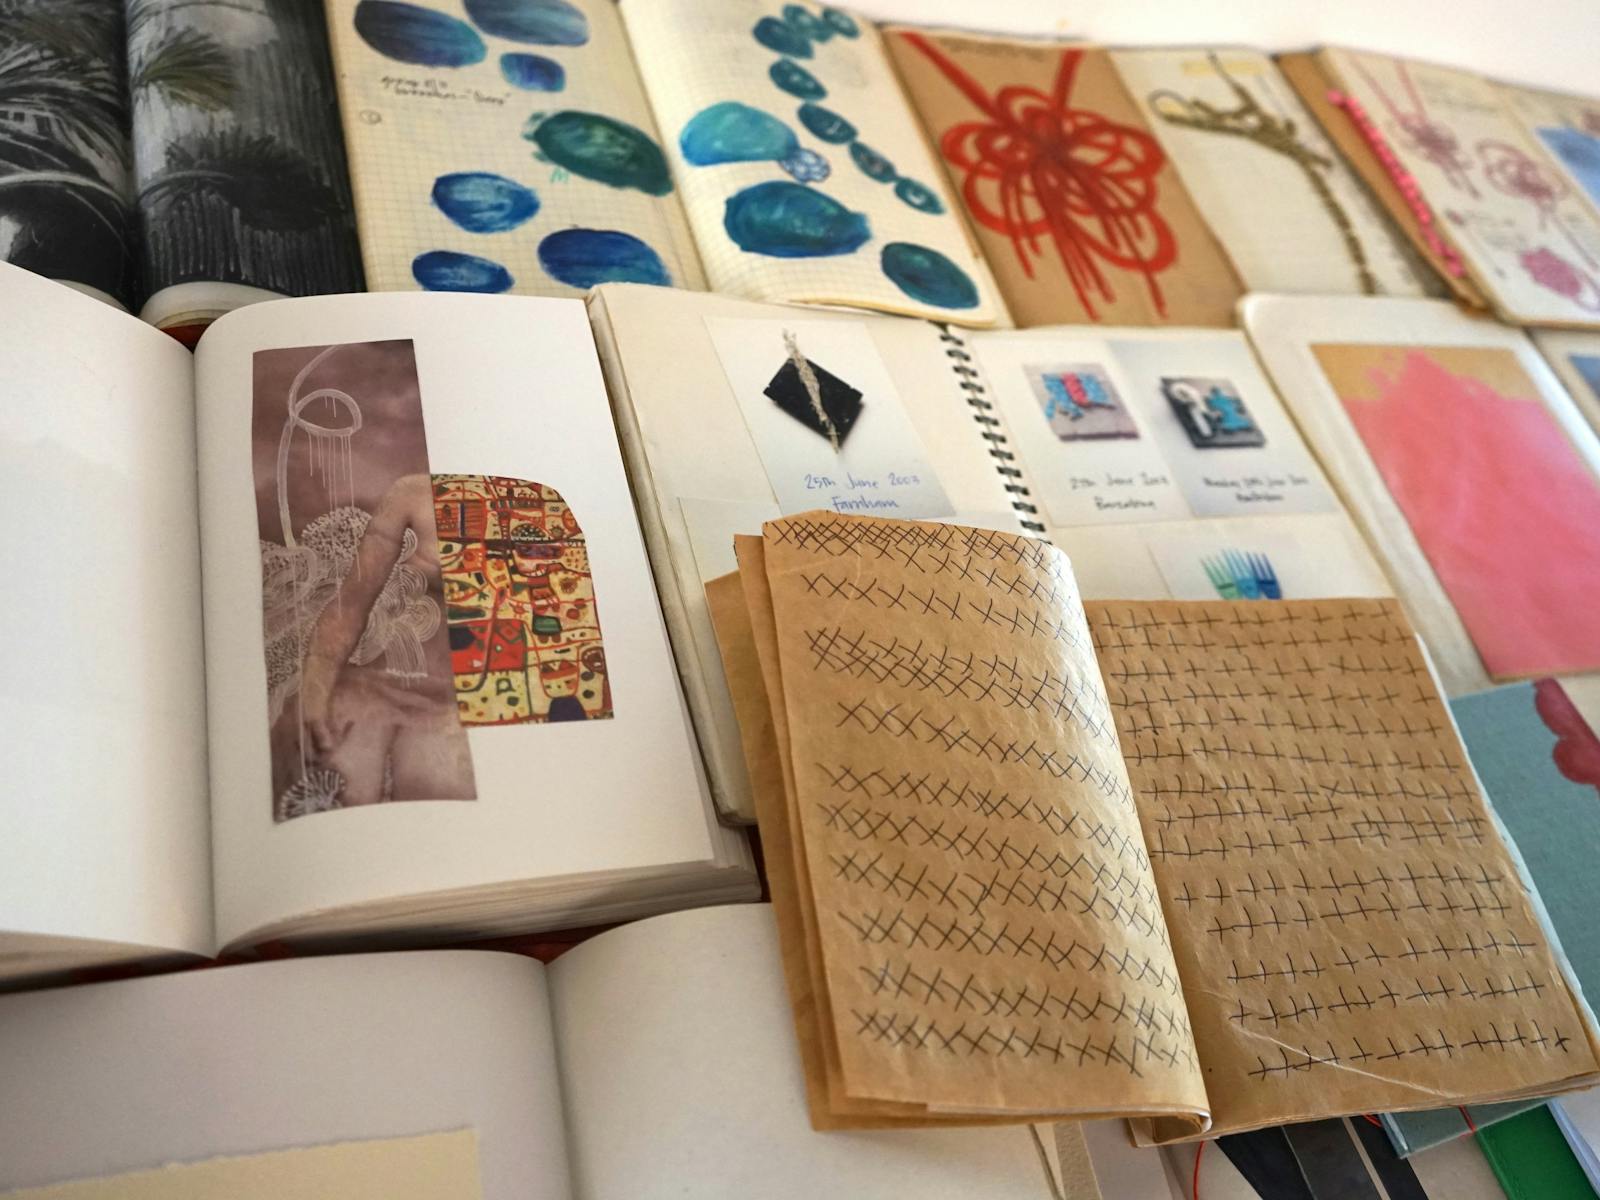 Image for Creative Journaling Workshop, presented by MakeShift in partnership with Australian Design Centre